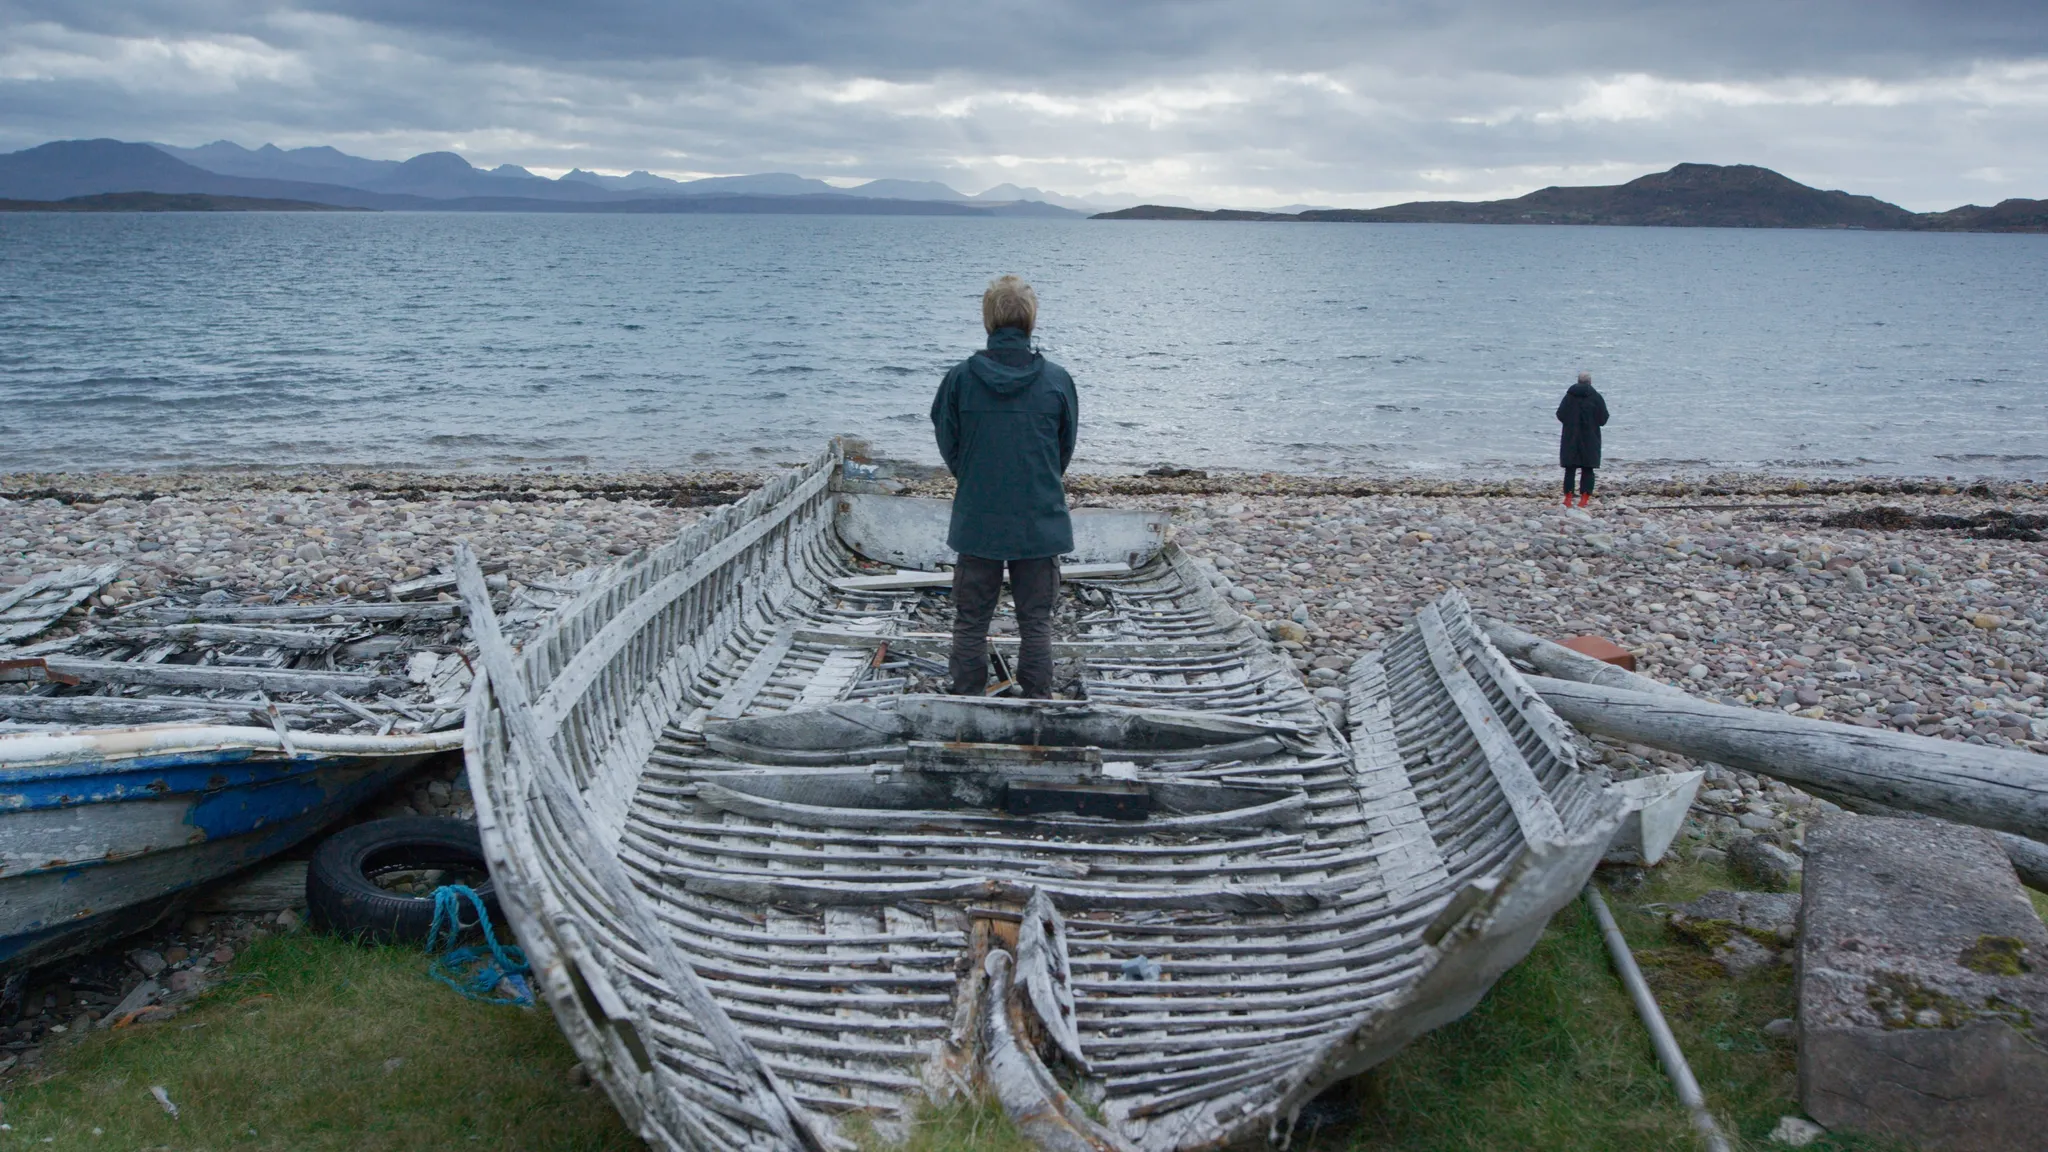 A person standing on a wrecked wooden ship on shingle beach, staring at the water